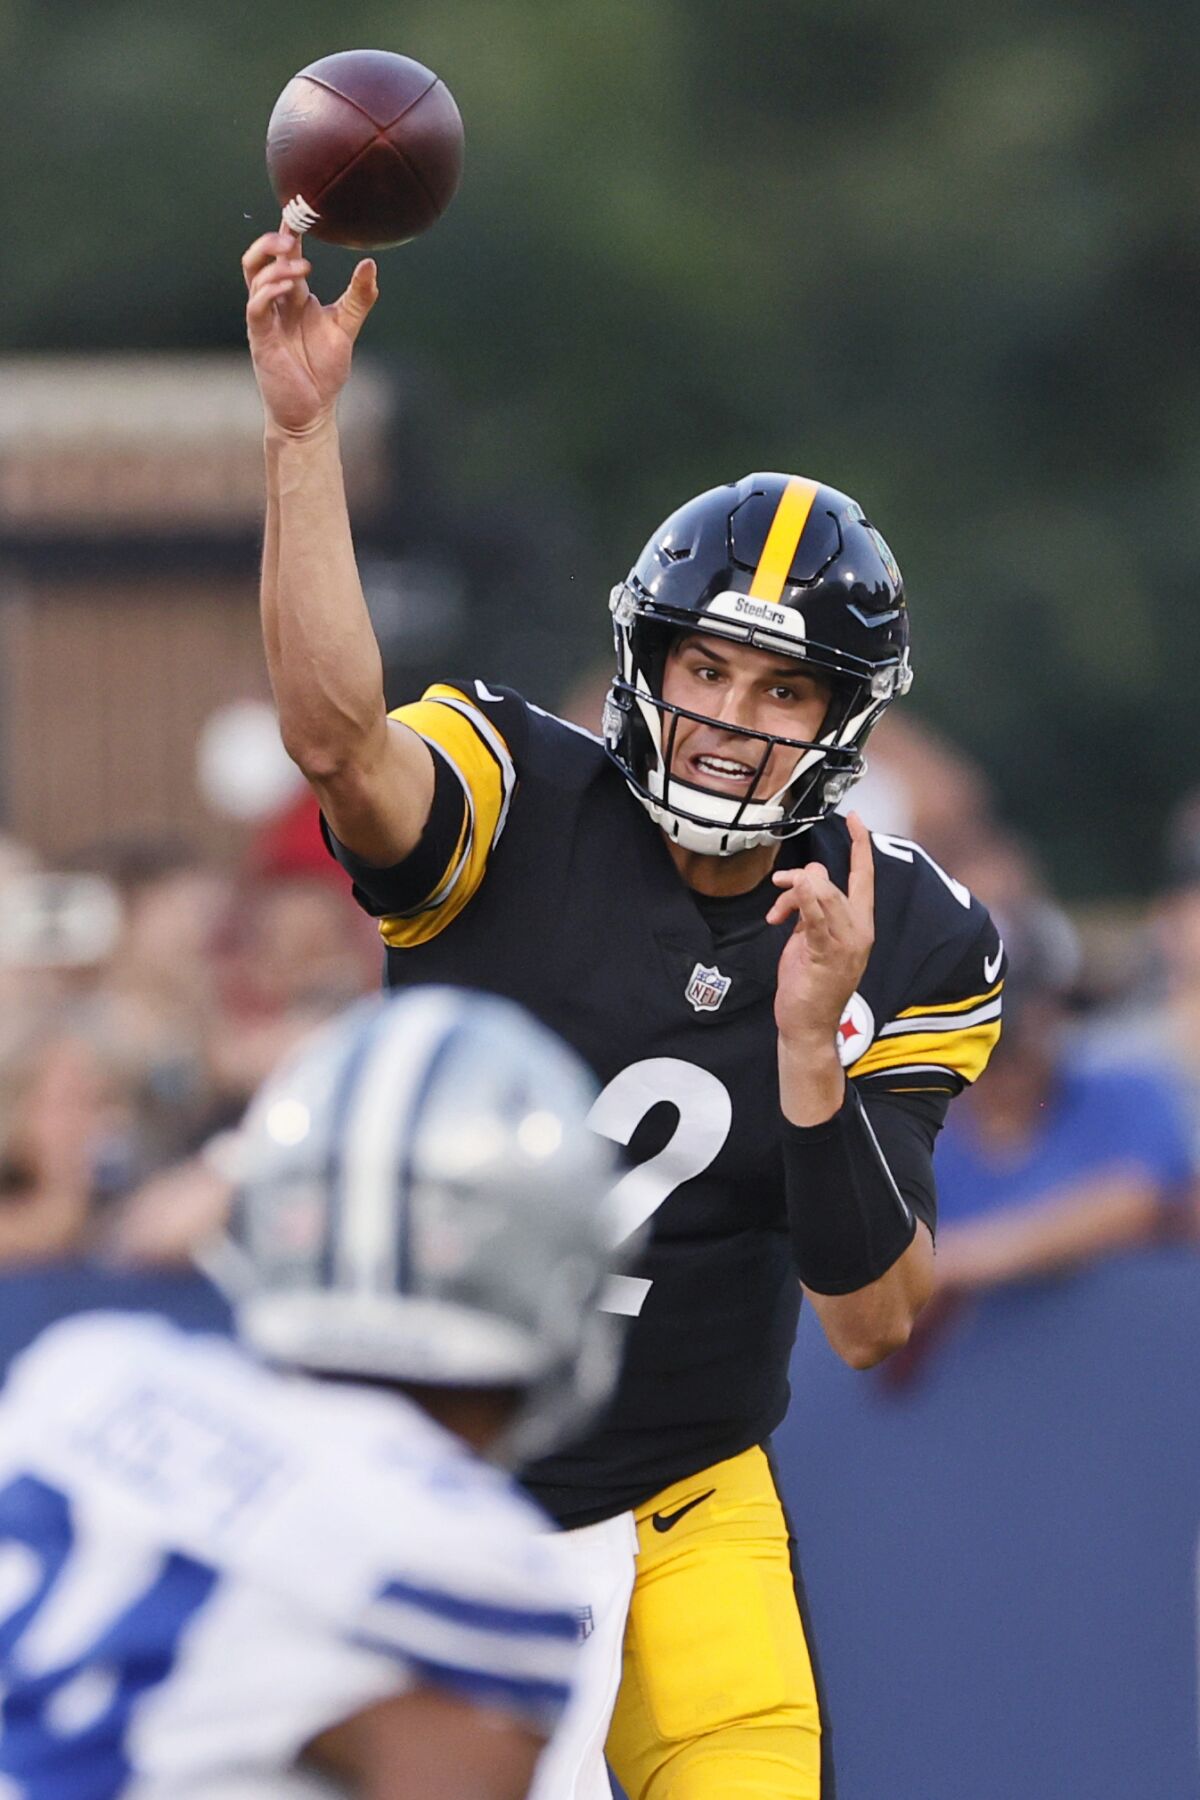 Pittsburgh Steelers quarterback Mason Rudolph throws a pass during the first half of the team's Pro Football Hall of Fame NFL preseason game against the Dallas Cowboys, Thursday, Aug. 5, 2021, in Canton, Ohio. (AP Photo/Ron Schwane)